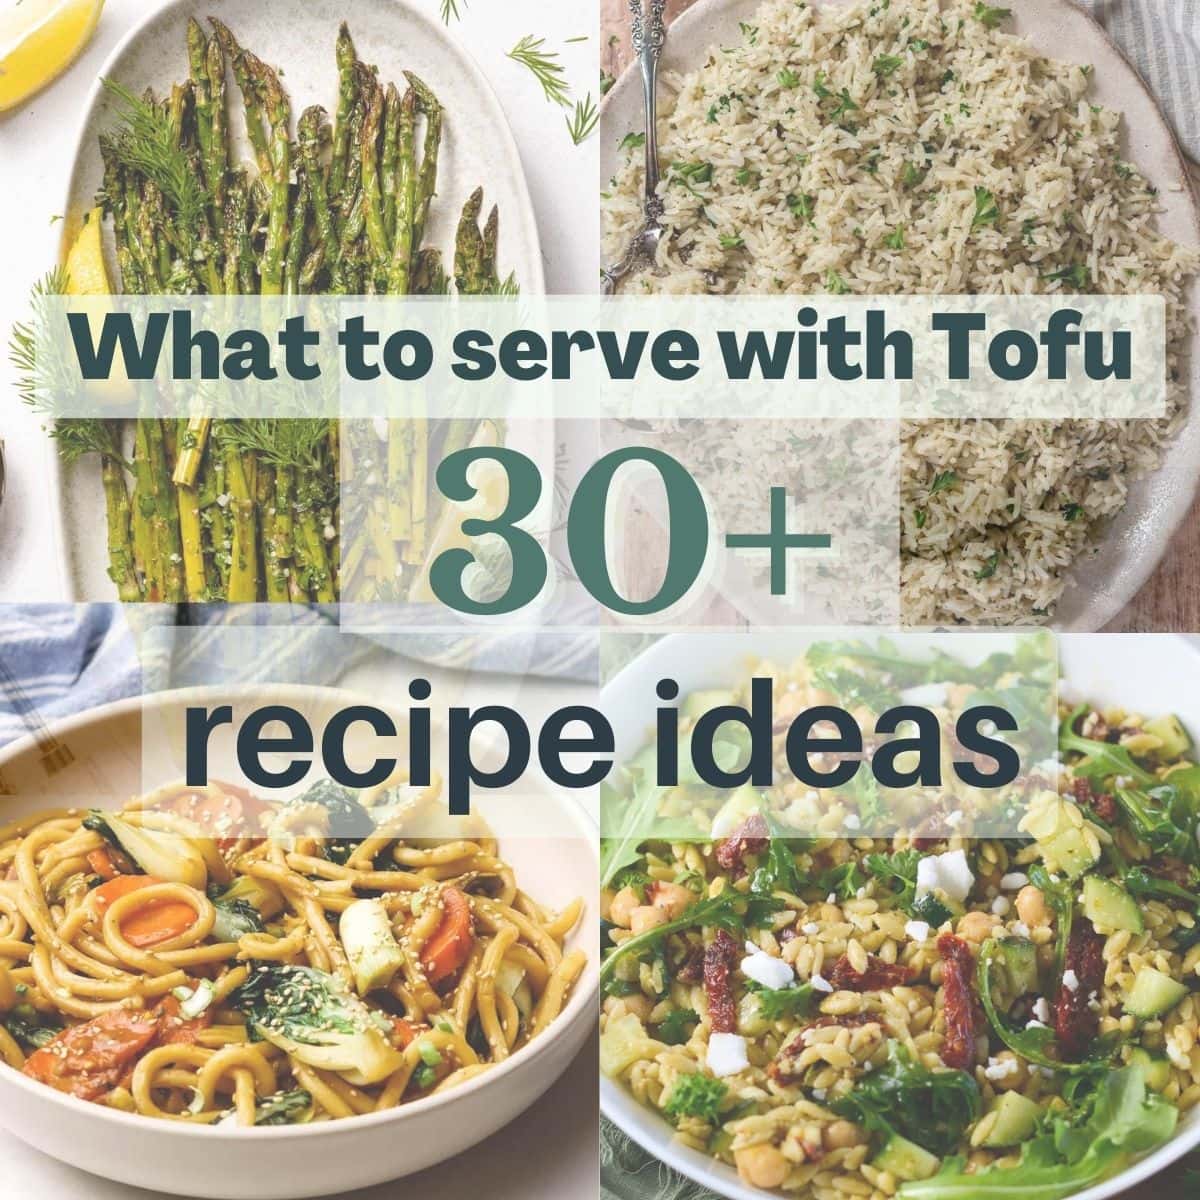 This is a photo that states What to serve with tofu, 30+ ideas